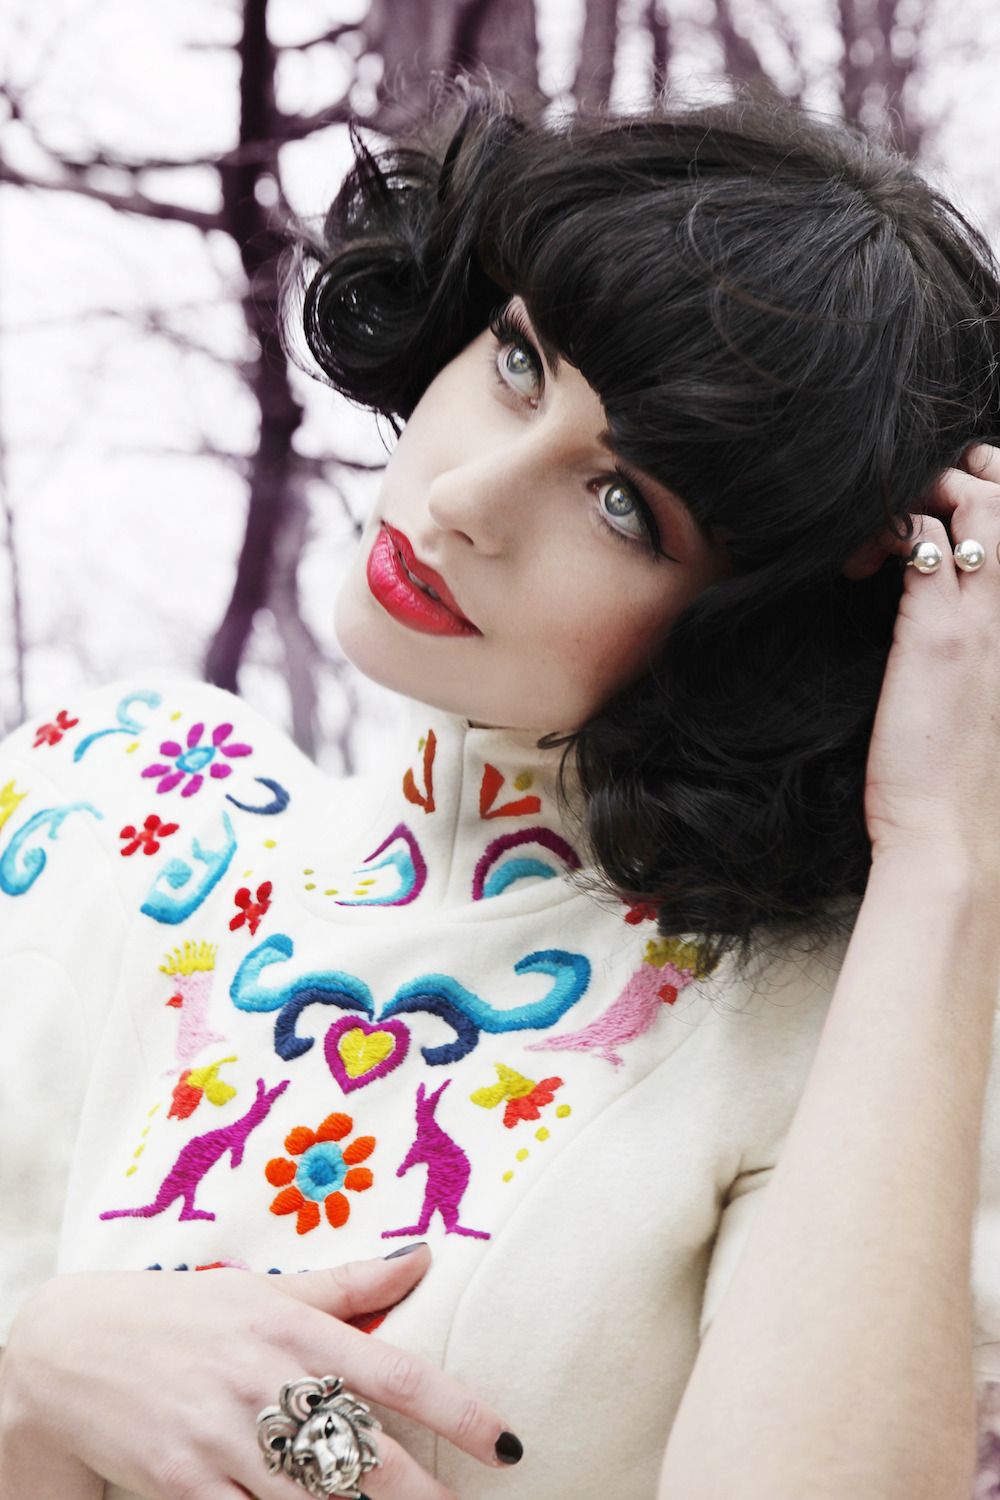 kimbra musicians pinterest april singers and fashion